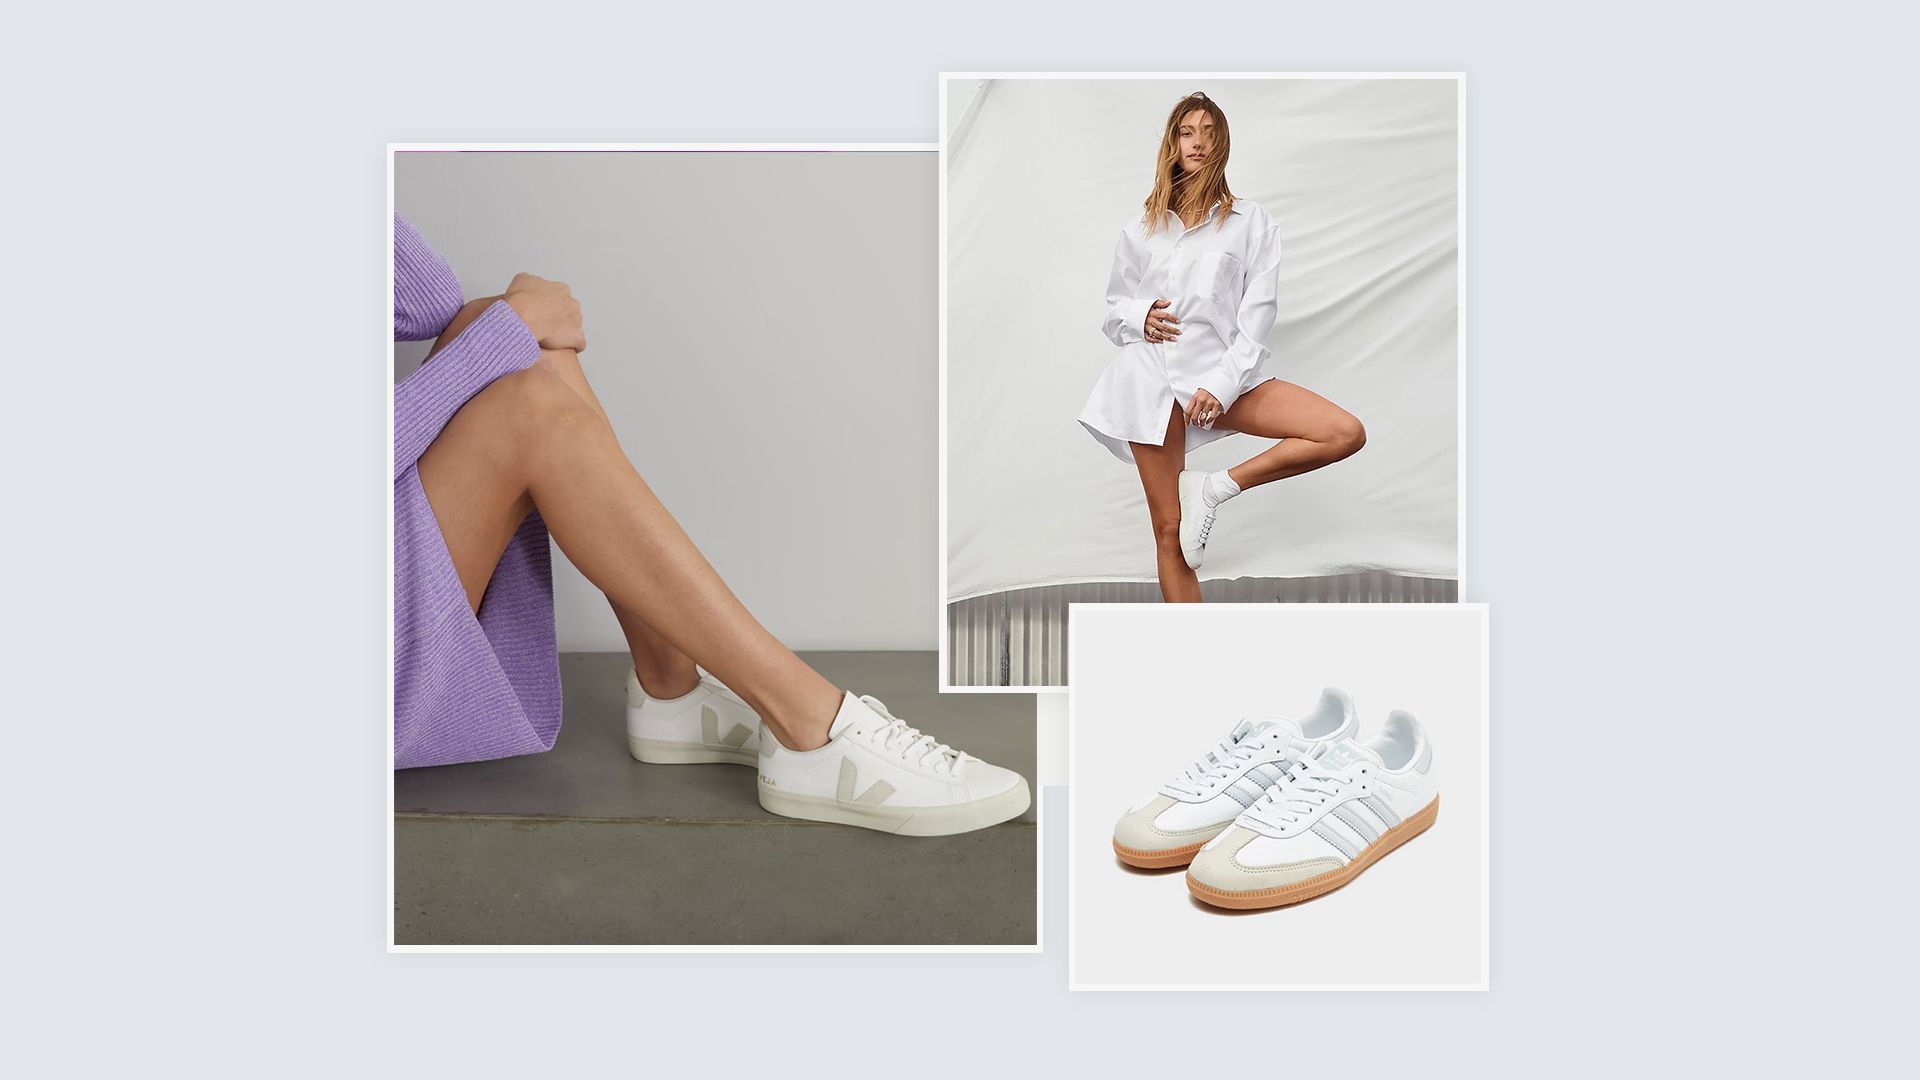 9 stylish white trainers for women: From Nike to New Balance